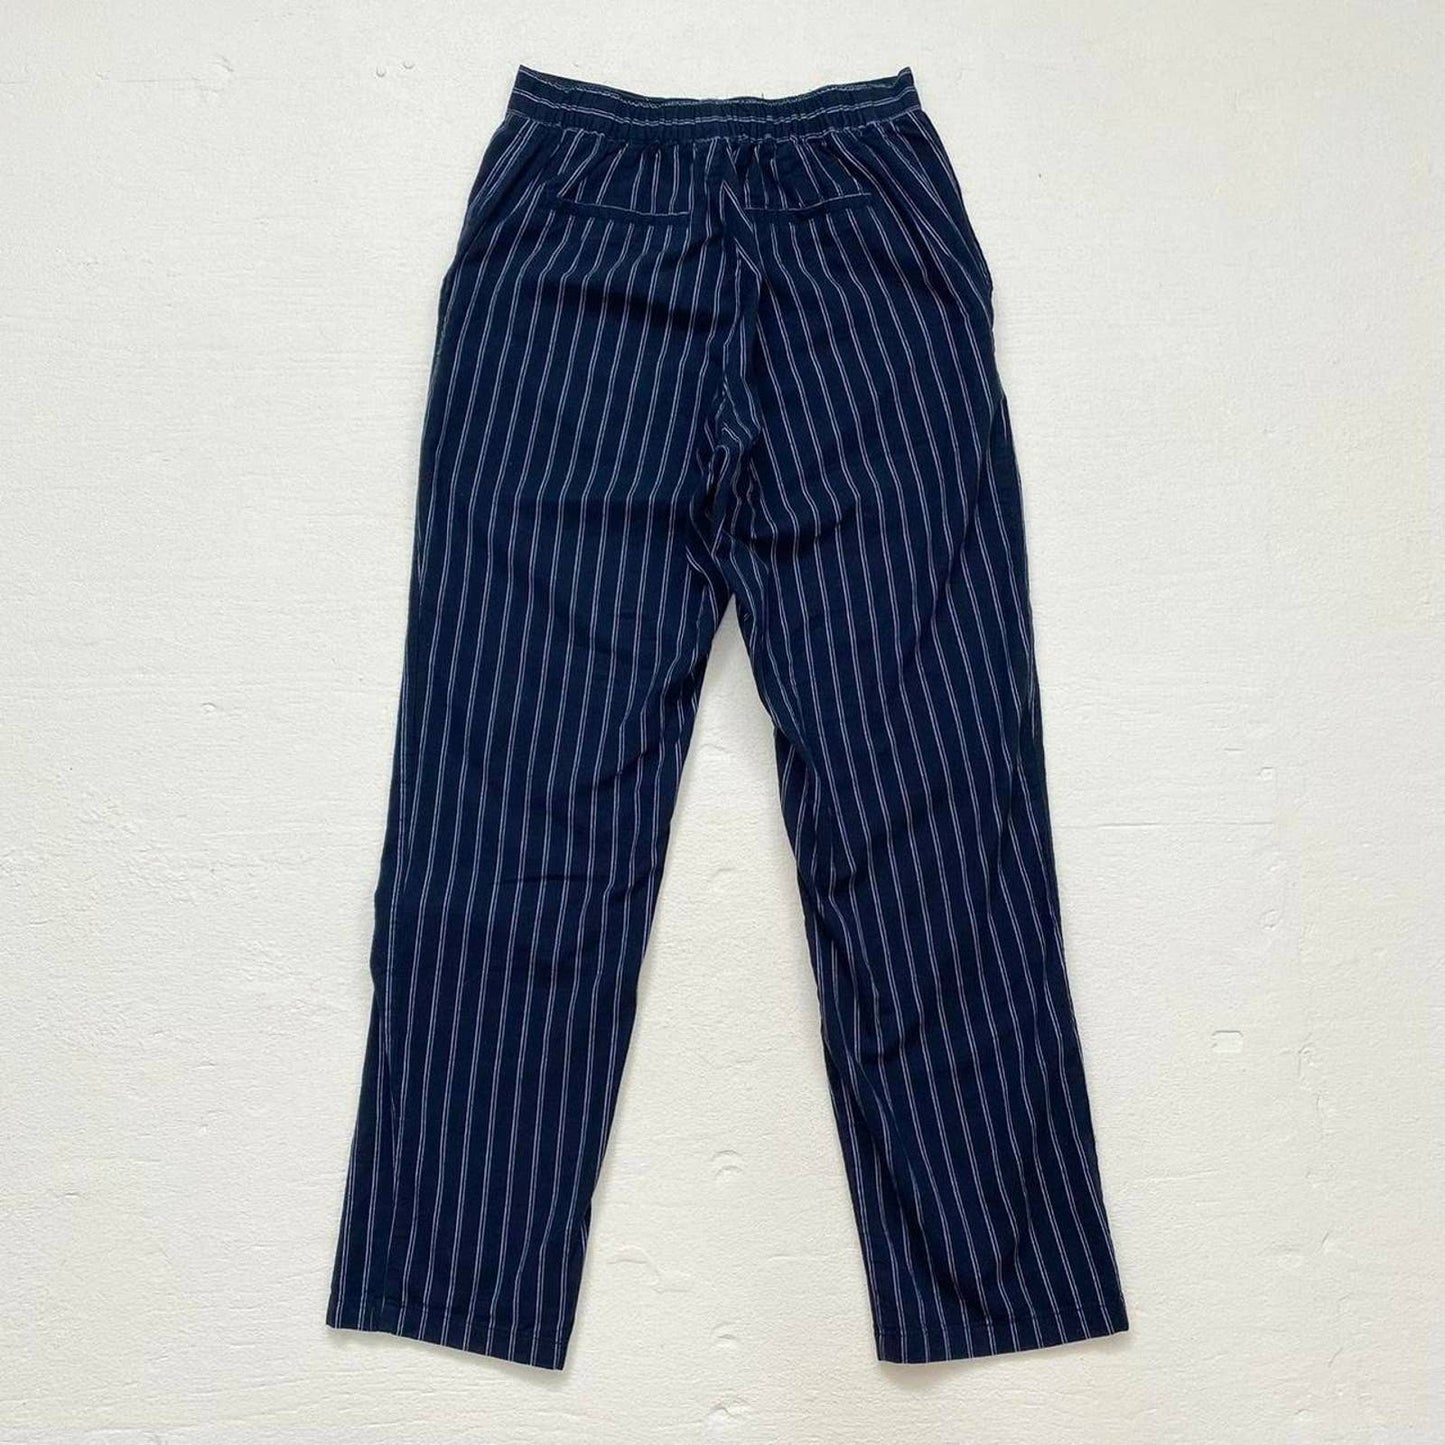 Secondhand High Waisted Pinstriped Trouser Pants, Size Small